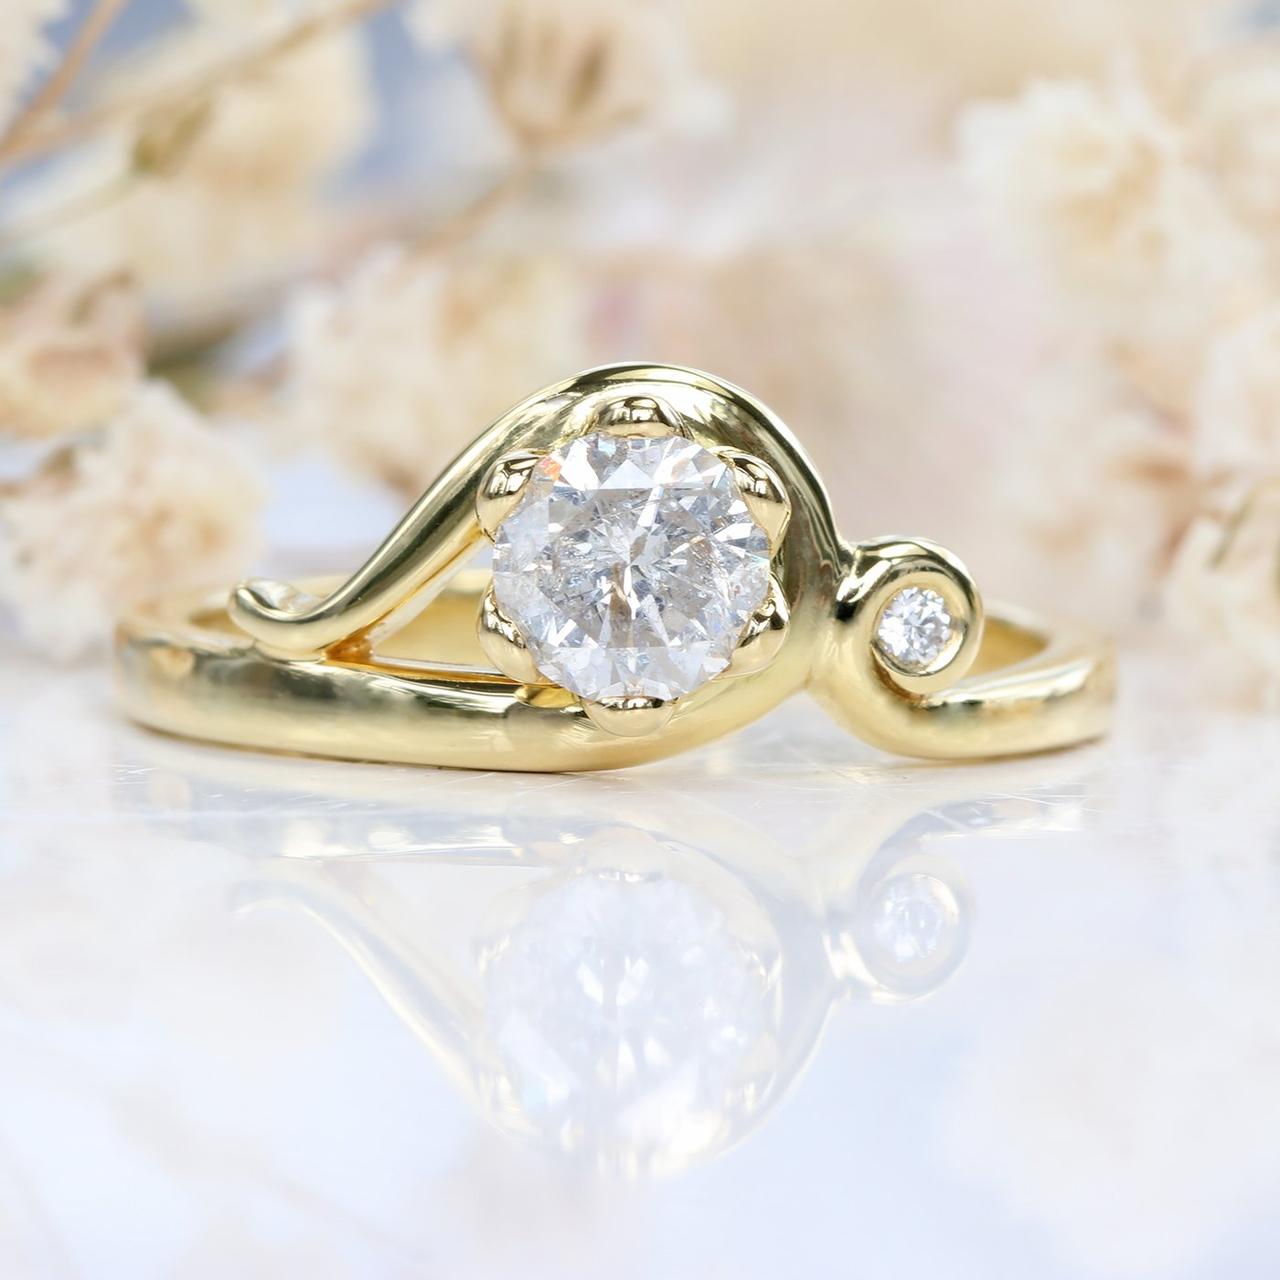 Minimalist Engagement Ring Styles You'll Love